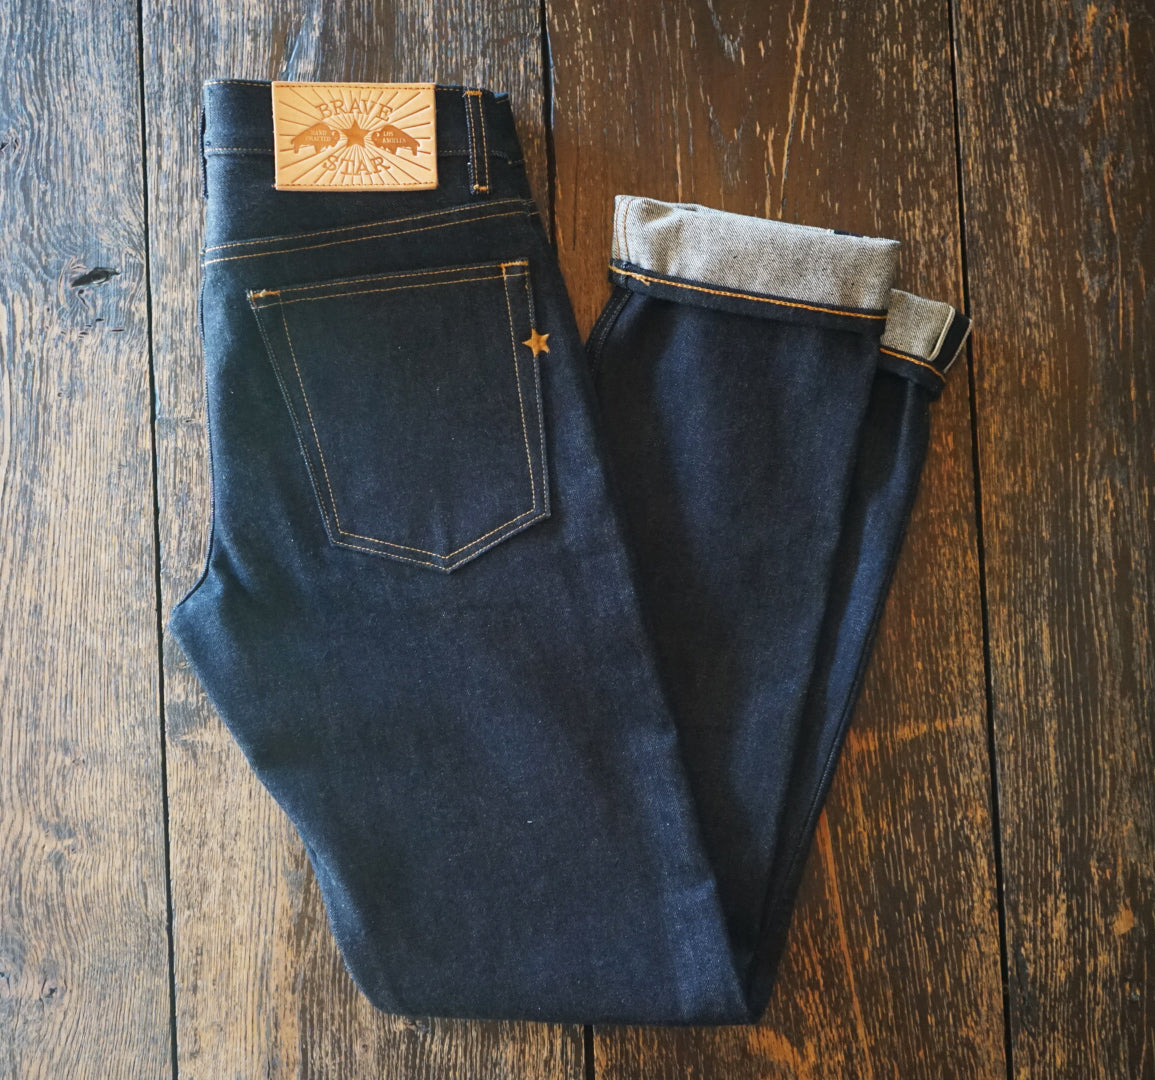 Brave Star raw selvedge Jeans 14oz 33' inch Levi's 501 style